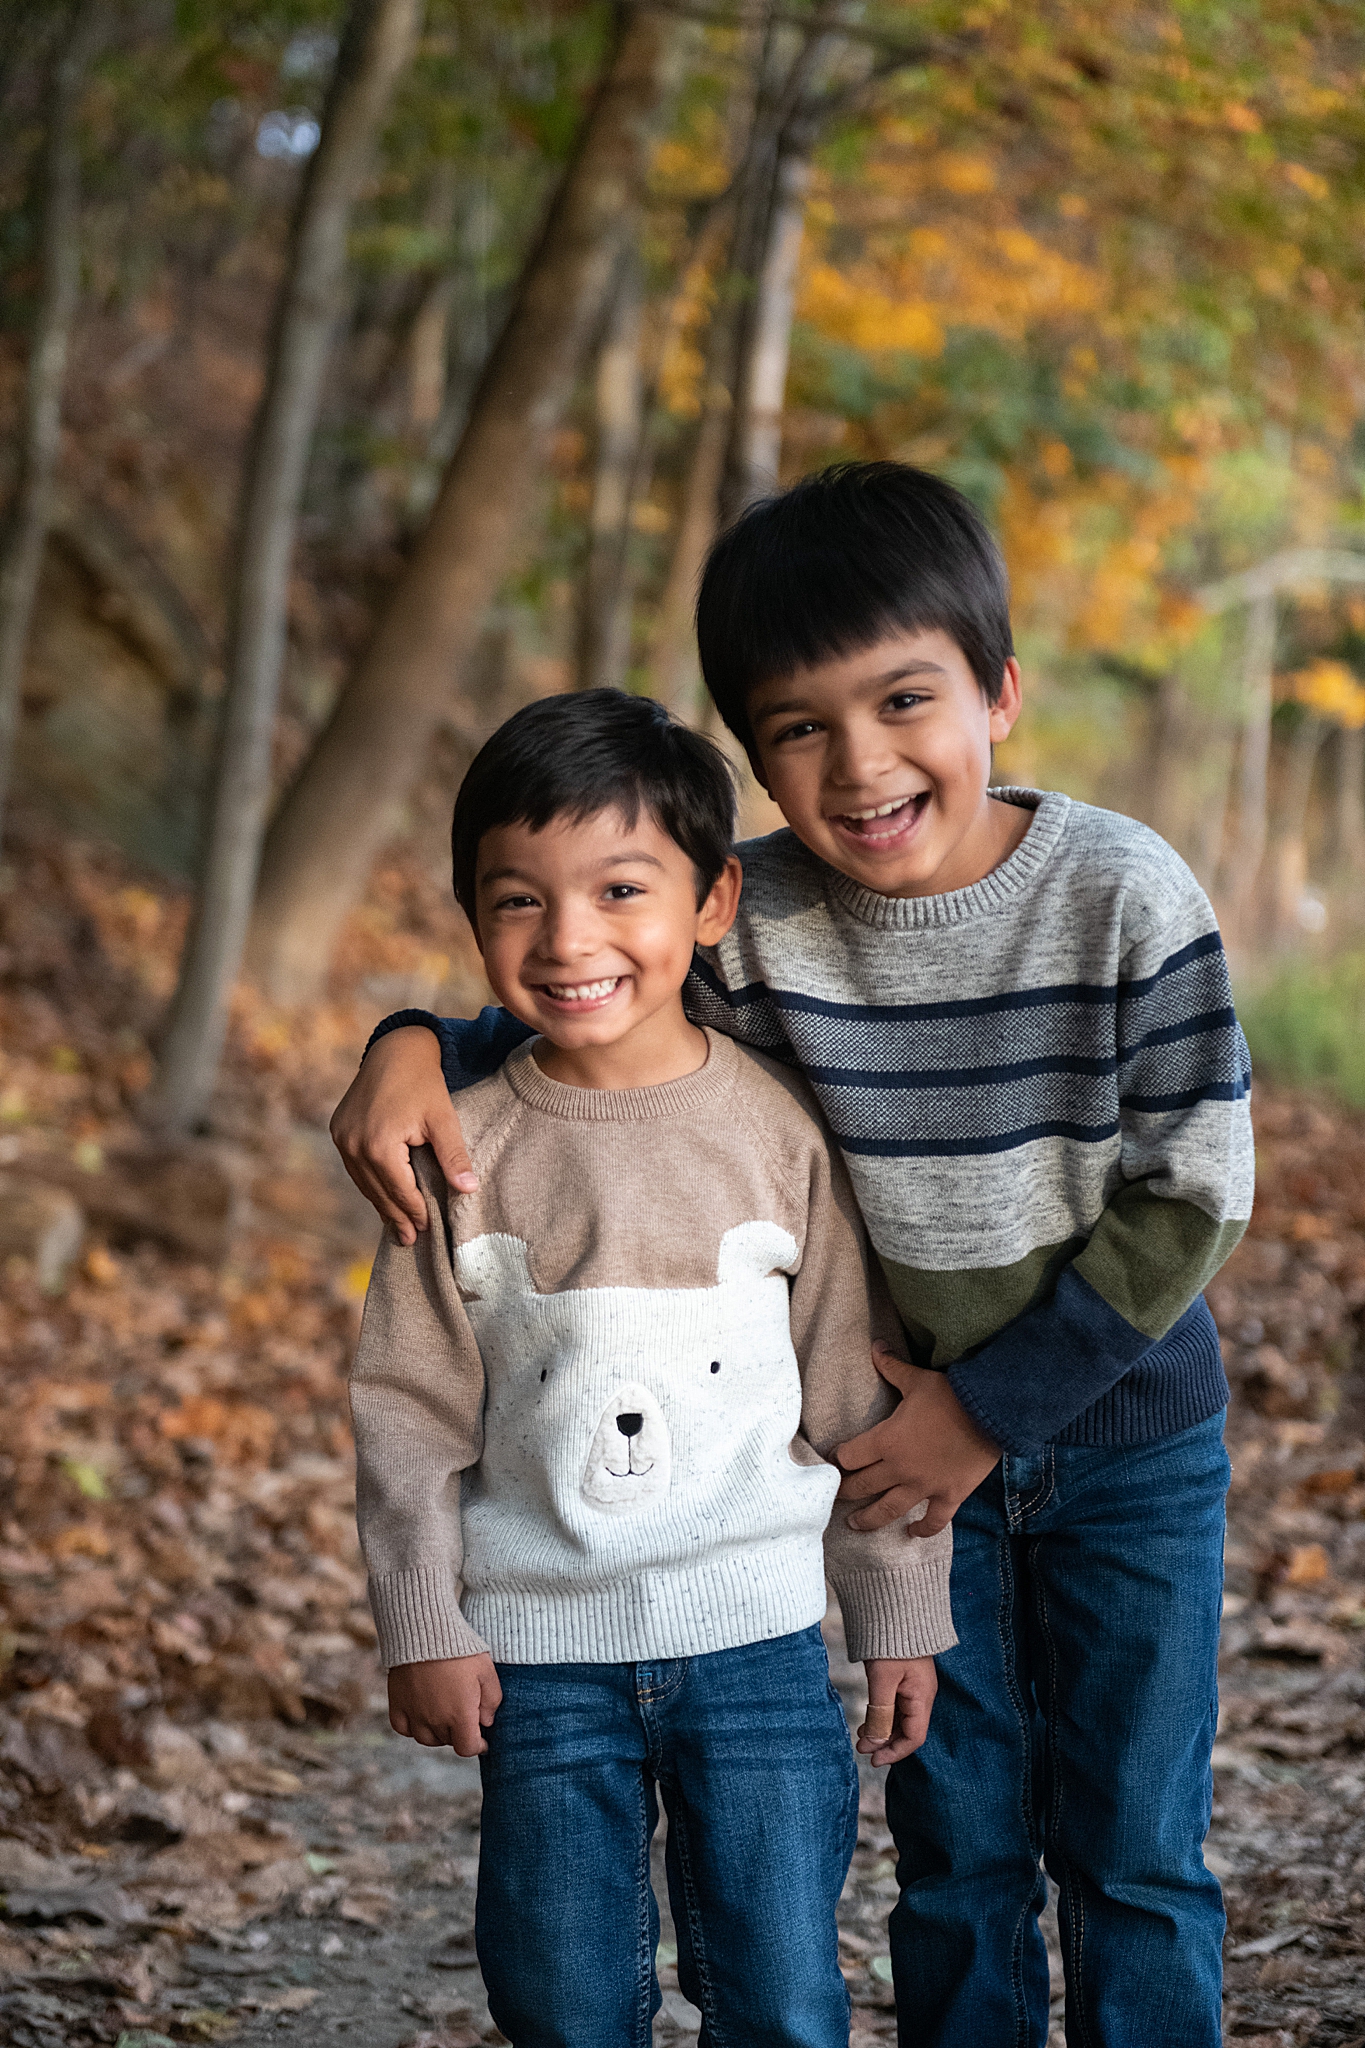 brother pose in playful sweaters during Lake Linganore family photo session